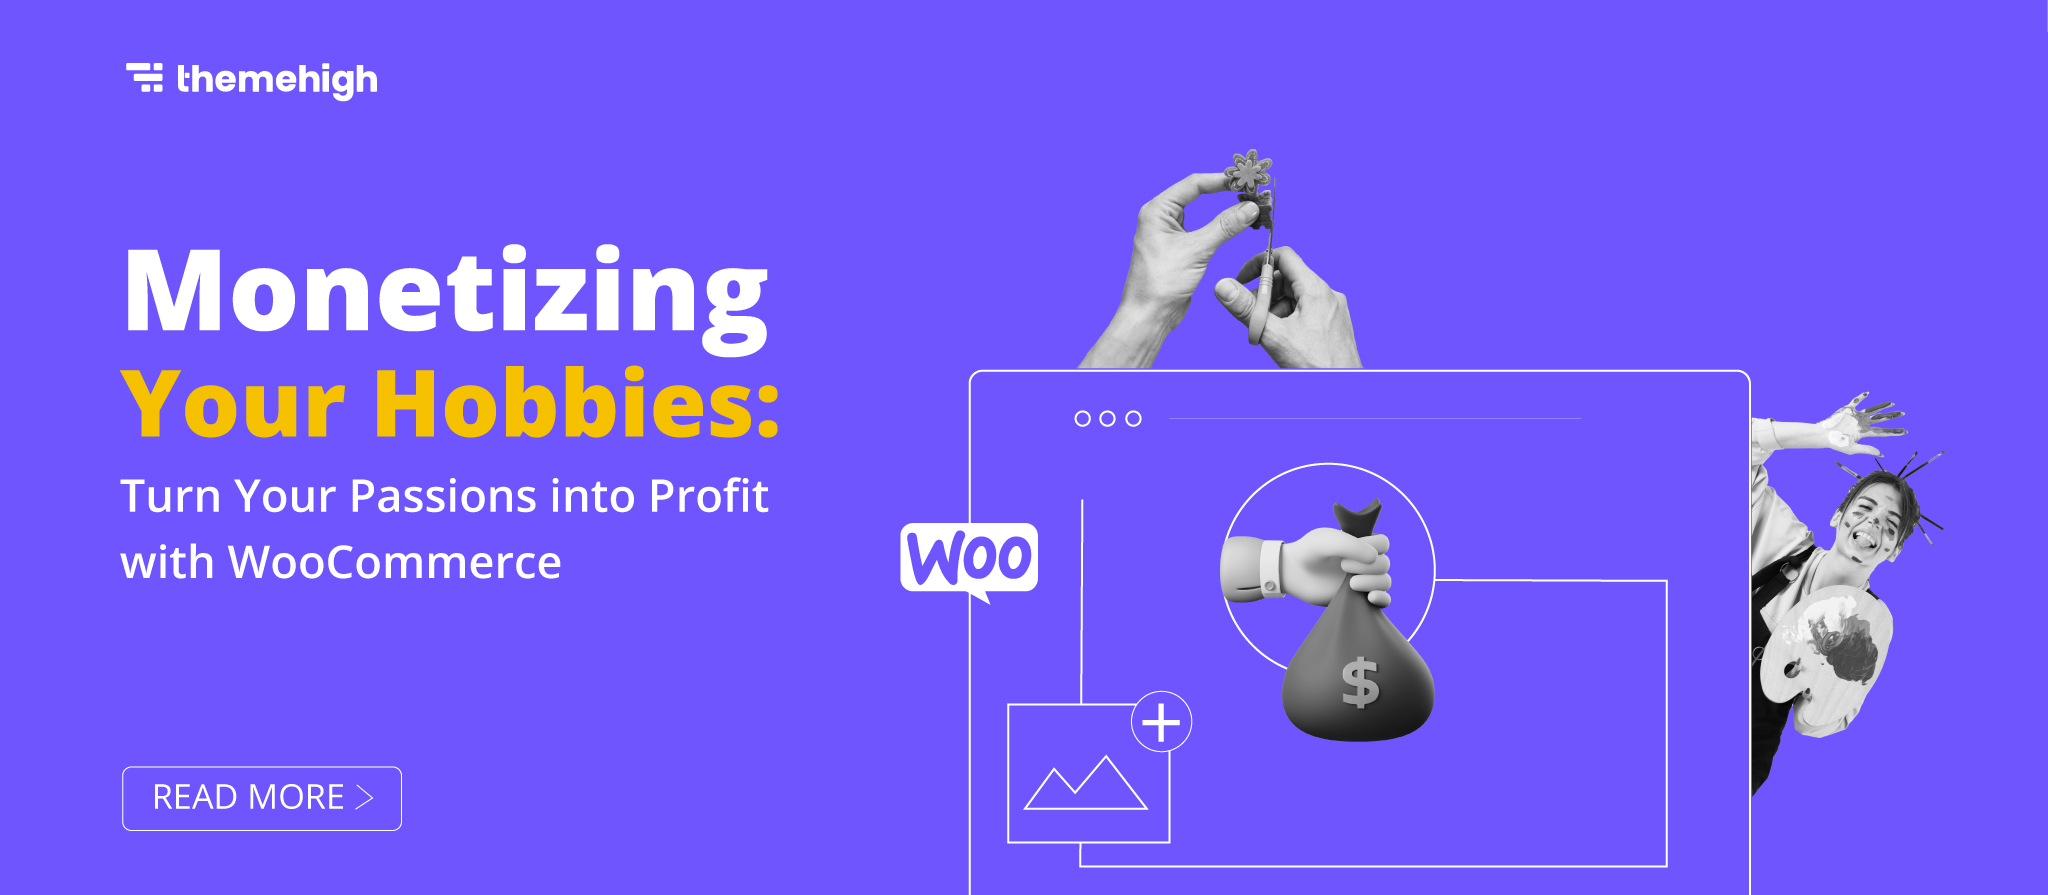 Monetizing Your Hobbies: Turn Your Passions into Profit with WooCommerce